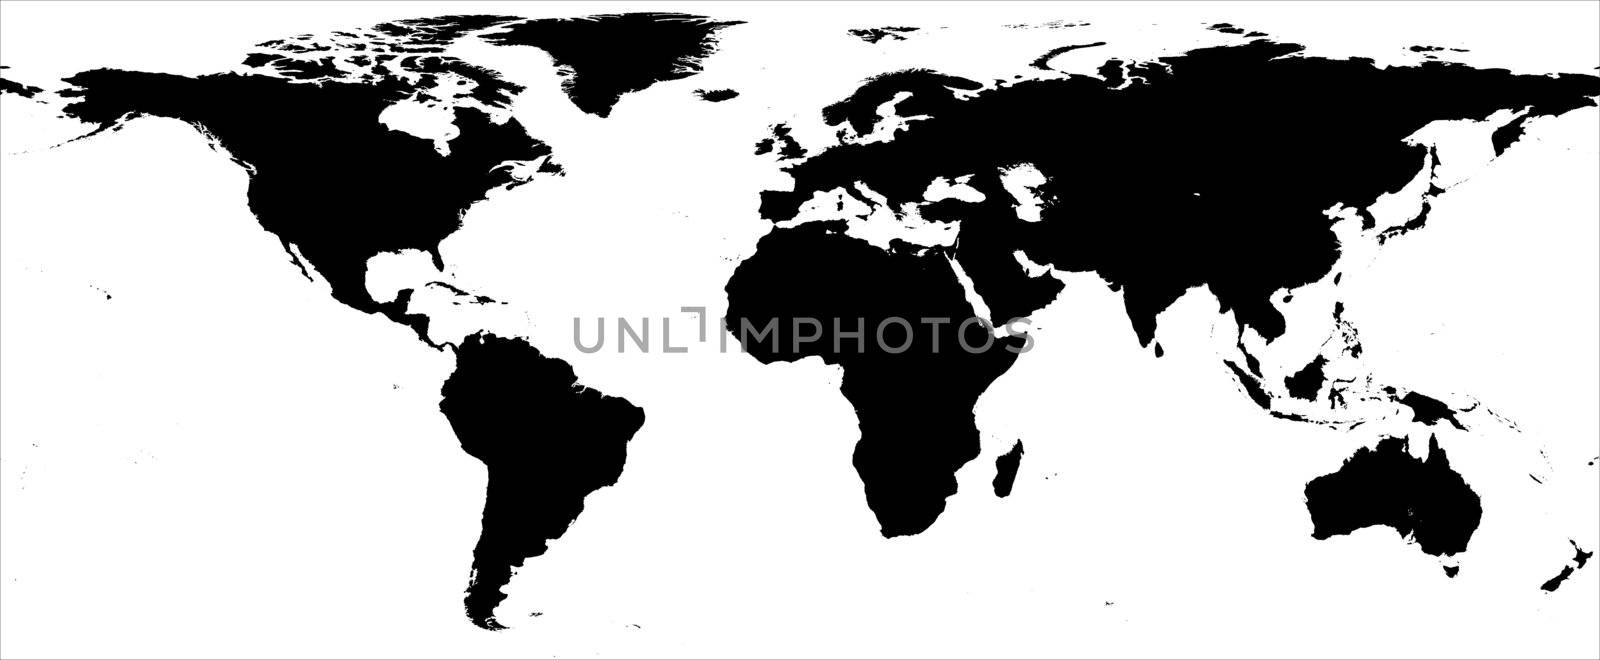 World map - black and white border by mozzyb